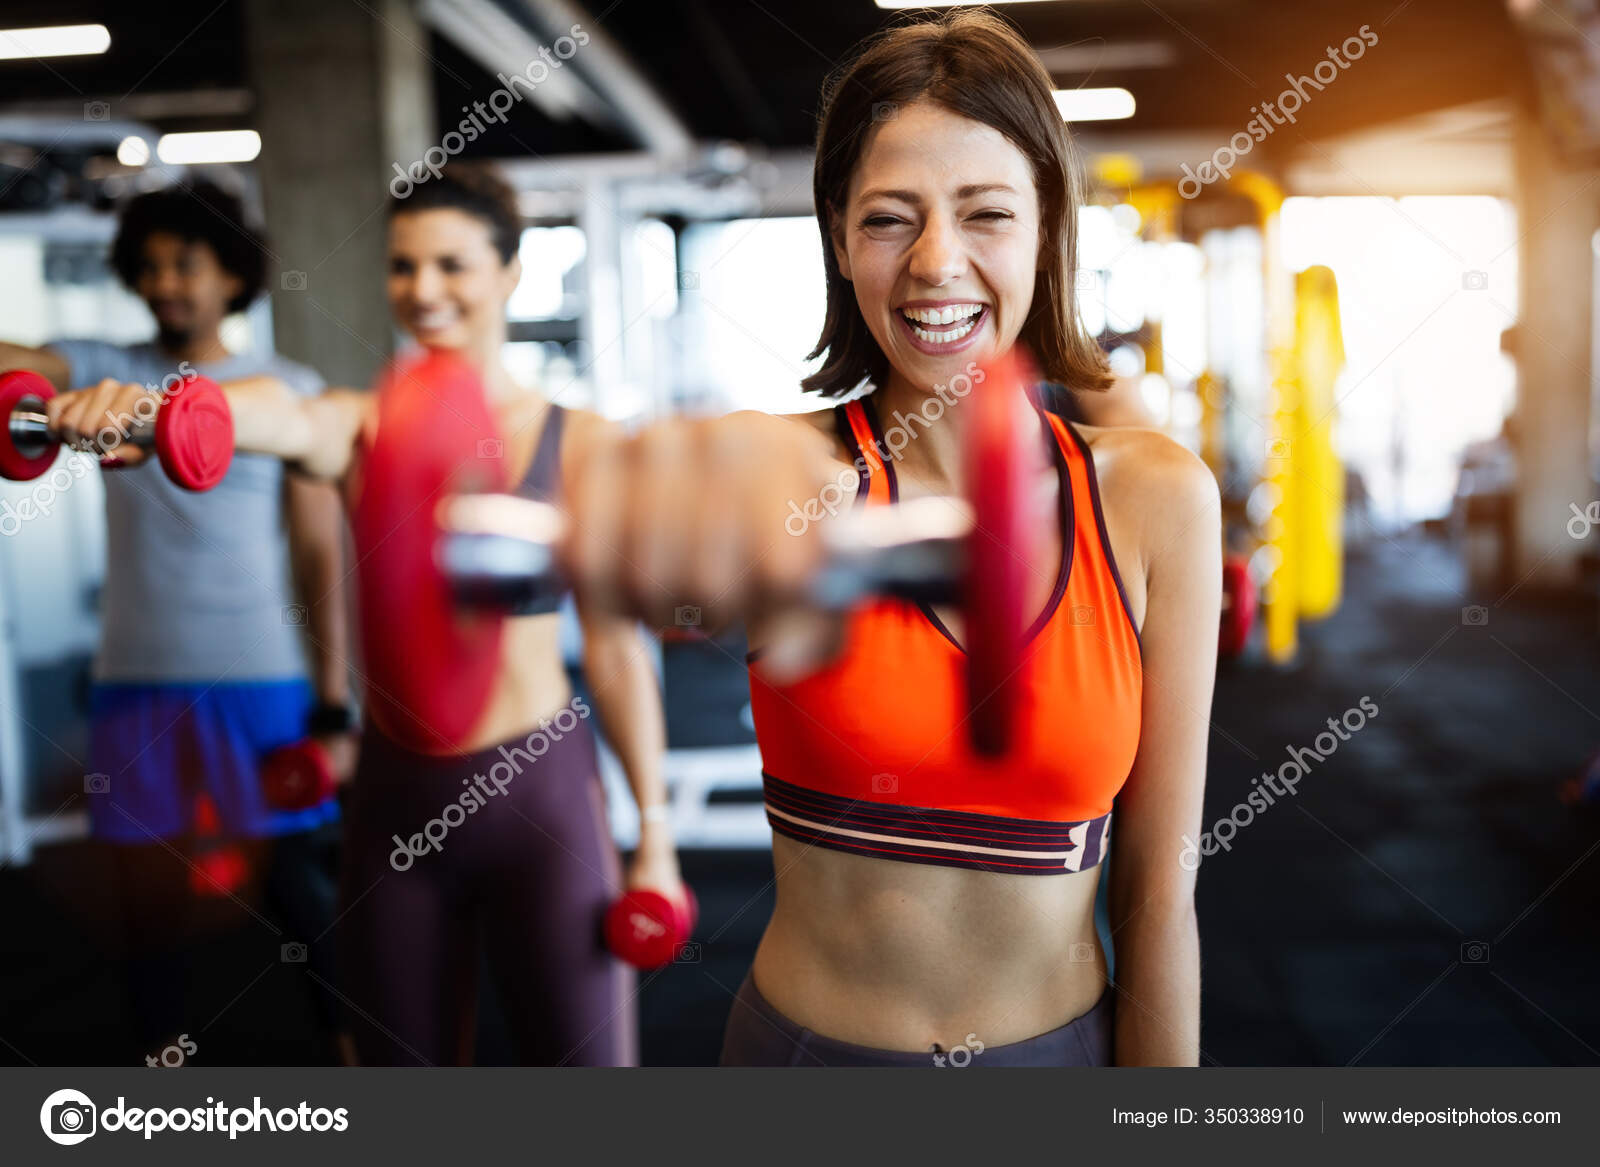 Happy Diverse People Exercise Together Gym Stay Healthy People